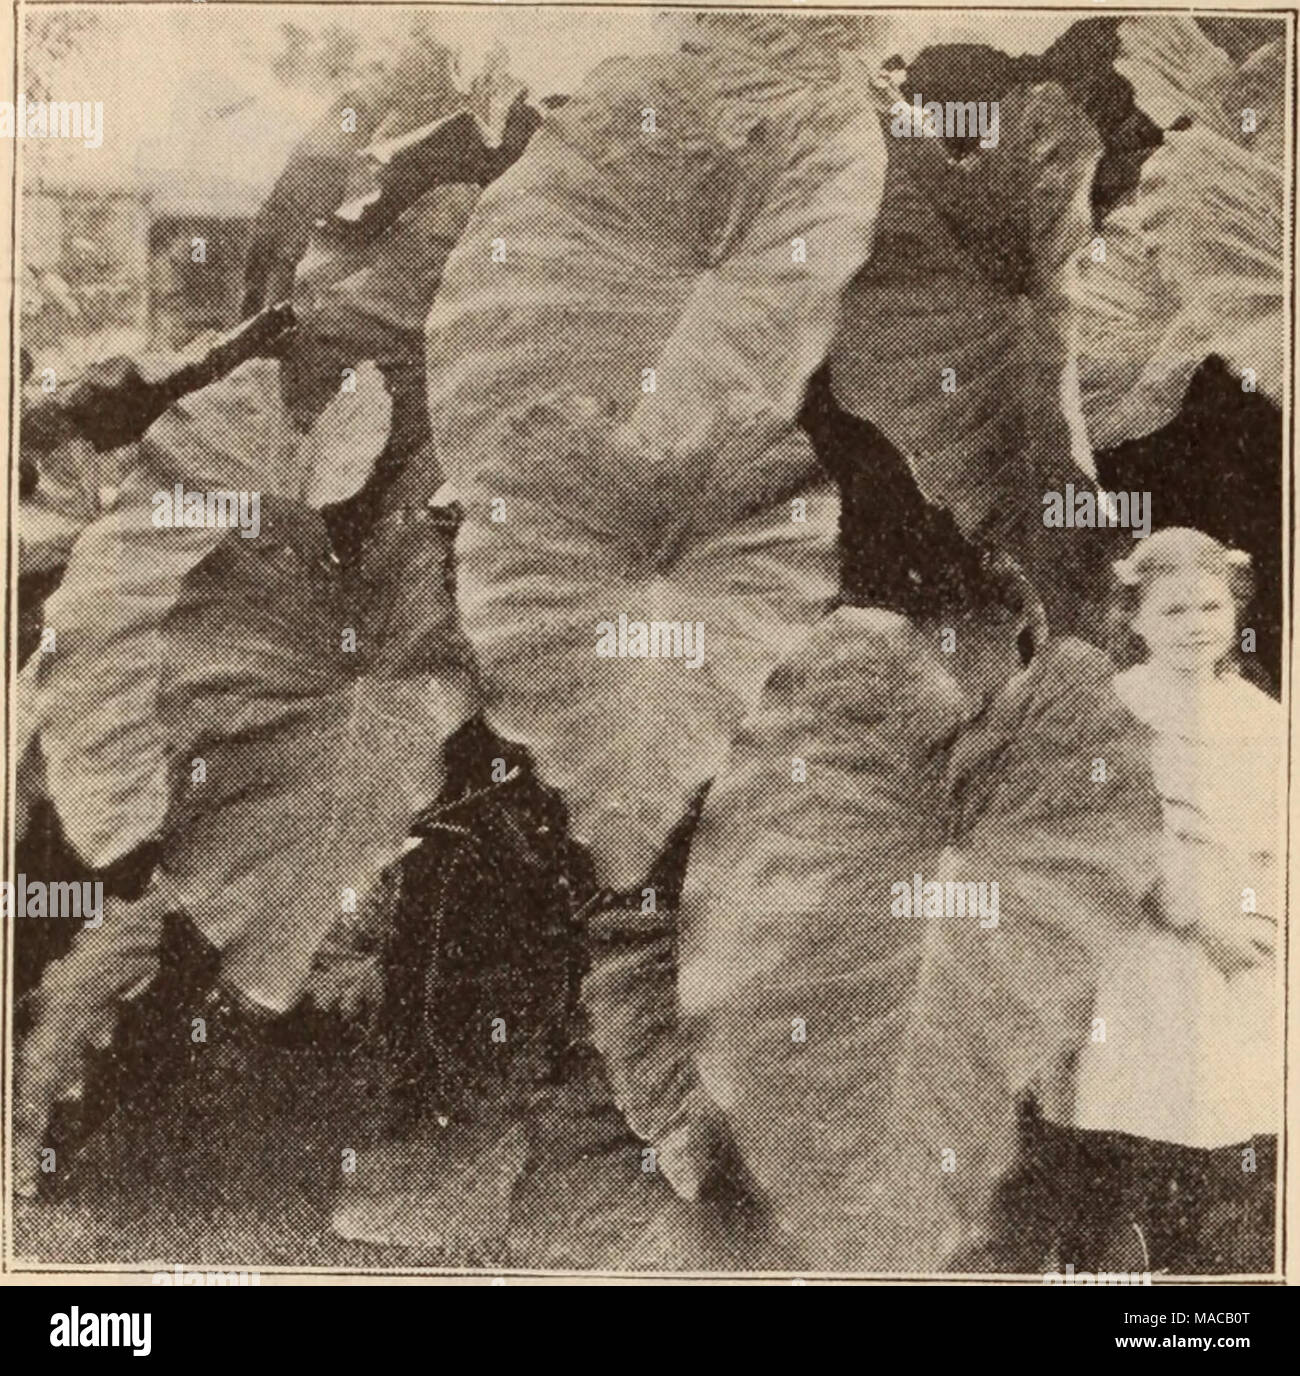 . Dreer's wholesale price list / Henry A. Dreer. . CALADIUM ESCULENTUM (Elephant's Ear) Amaryllis. Each Per doz Nehrling's Florida Hybrids. A magrnificentstrain of 60 $6 00 50 5 00 50 5 00 Pormoslssima $5.00 per 100 06 60 25 2 50 Prince of Orange 40 4 00 R. H. James, Dazzling scarlet, feathered with white 75 7 50 50 5 00 Vlttata Hybrids 30 3 00 Williamsi 35 3 50 Amorphophallus. Rivieri. Strong bulbs 30 3 00 TuberouS'^rooted Begonias. We handle the very finest strain that money can buy being grown for us by a noted specialist. Doz. 100 1000 Single. Scarlet, white, crimson, rose, yellow and oran Stock Photo